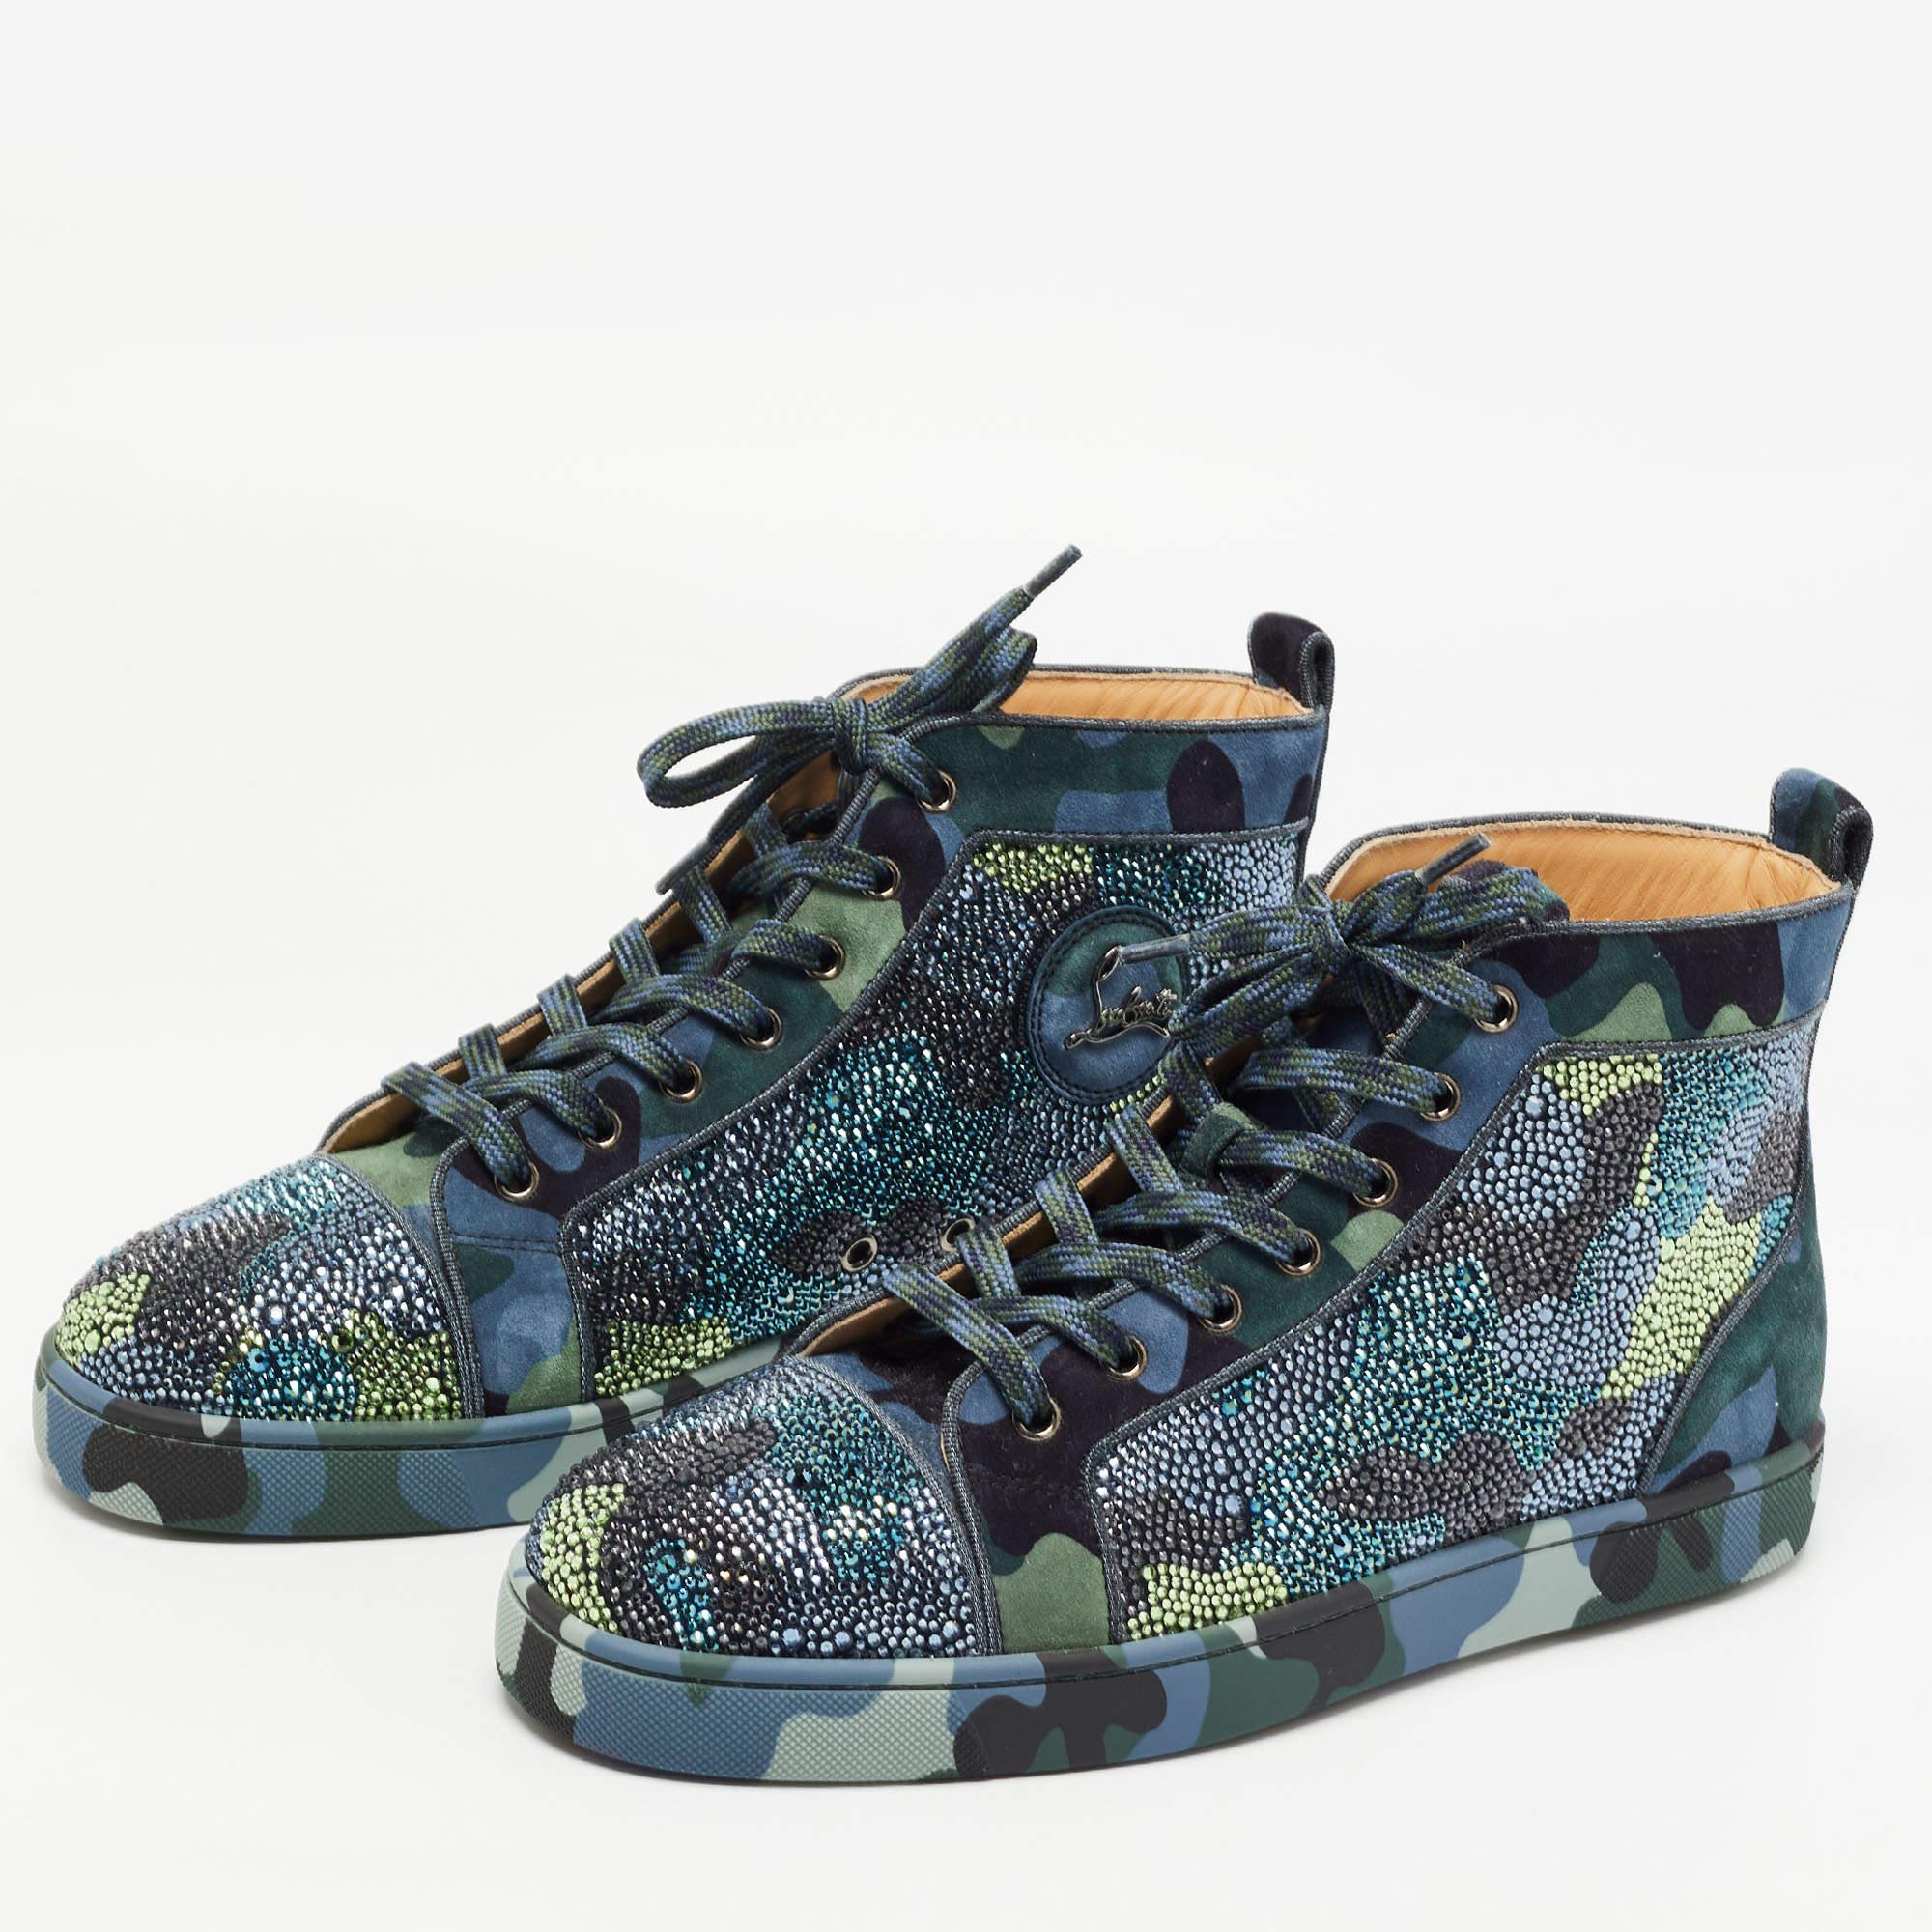 Men's Christian Louboutin Tricolor Camouflage Louis Orlato Strass High Top Size 42